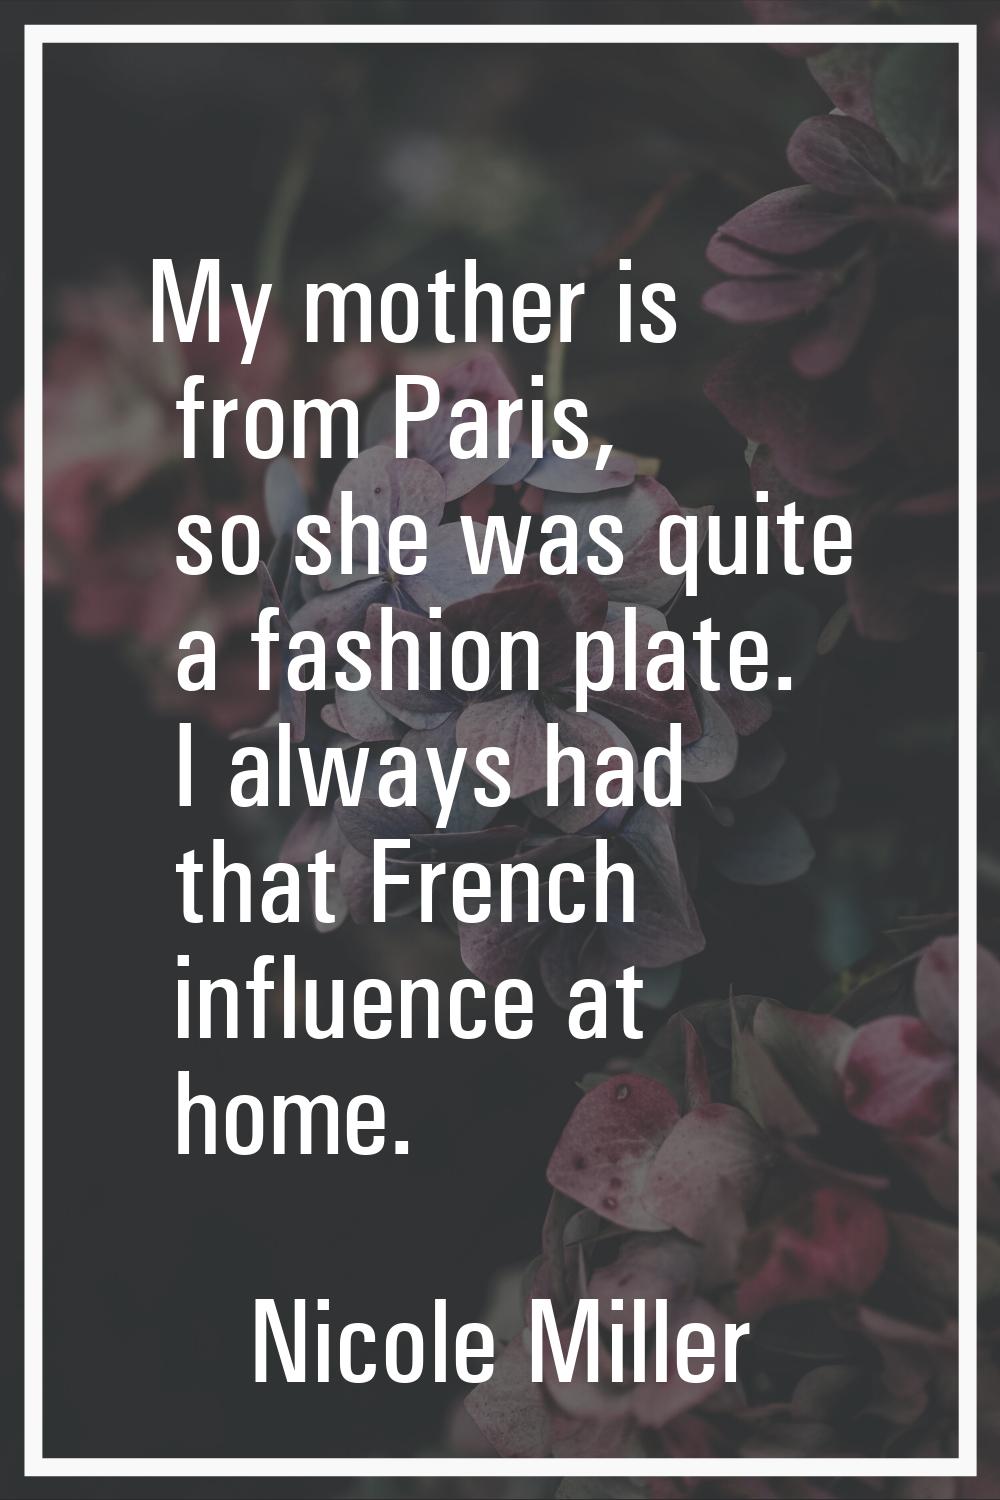 My mother is from Paris, so she was quite a fashion plate. I always had that French influence at ho